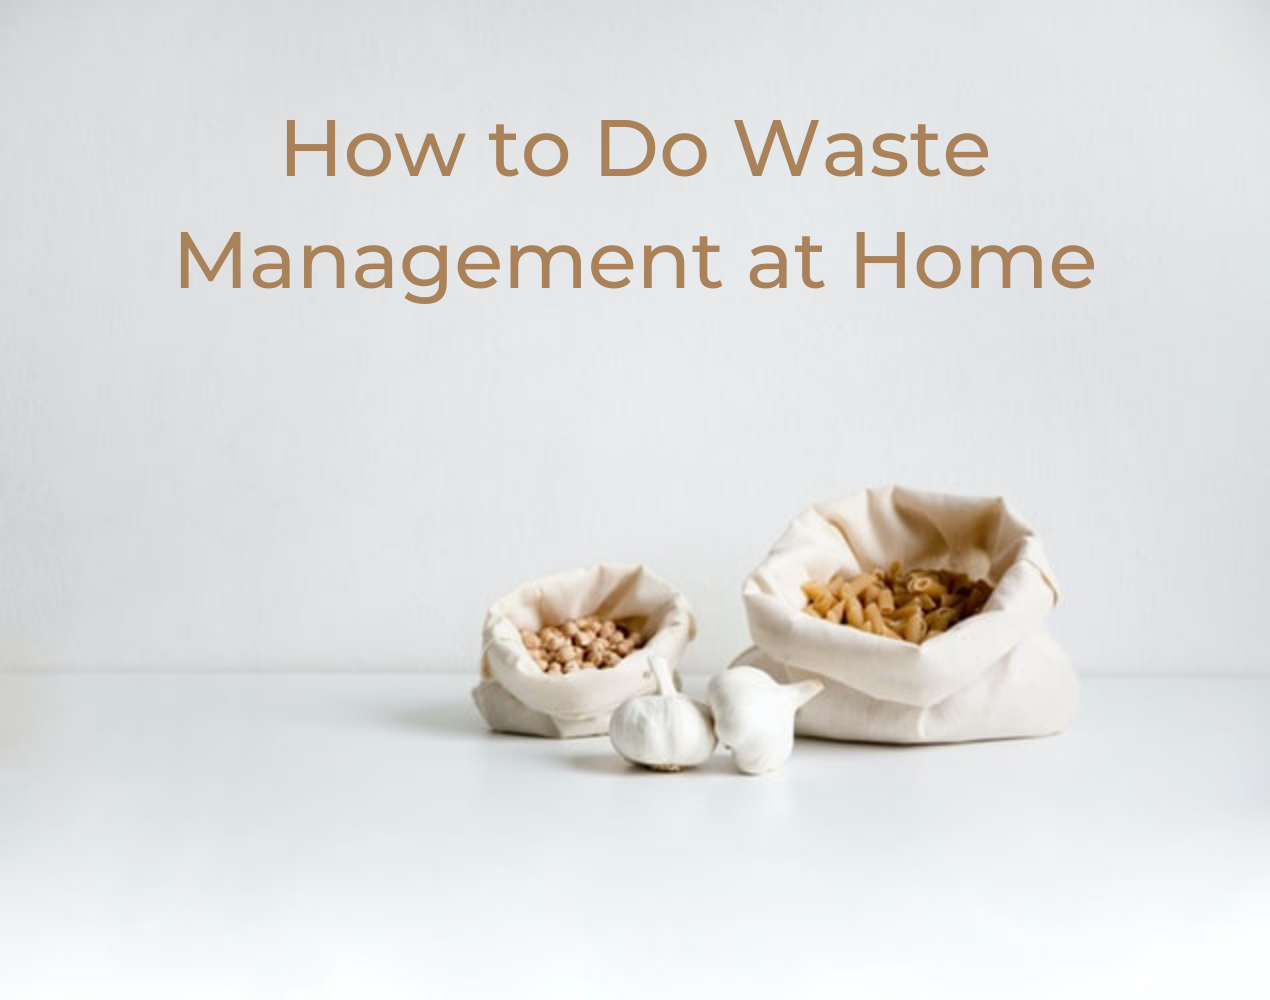 how-to-do-waste-management-at-home-in-10-steps